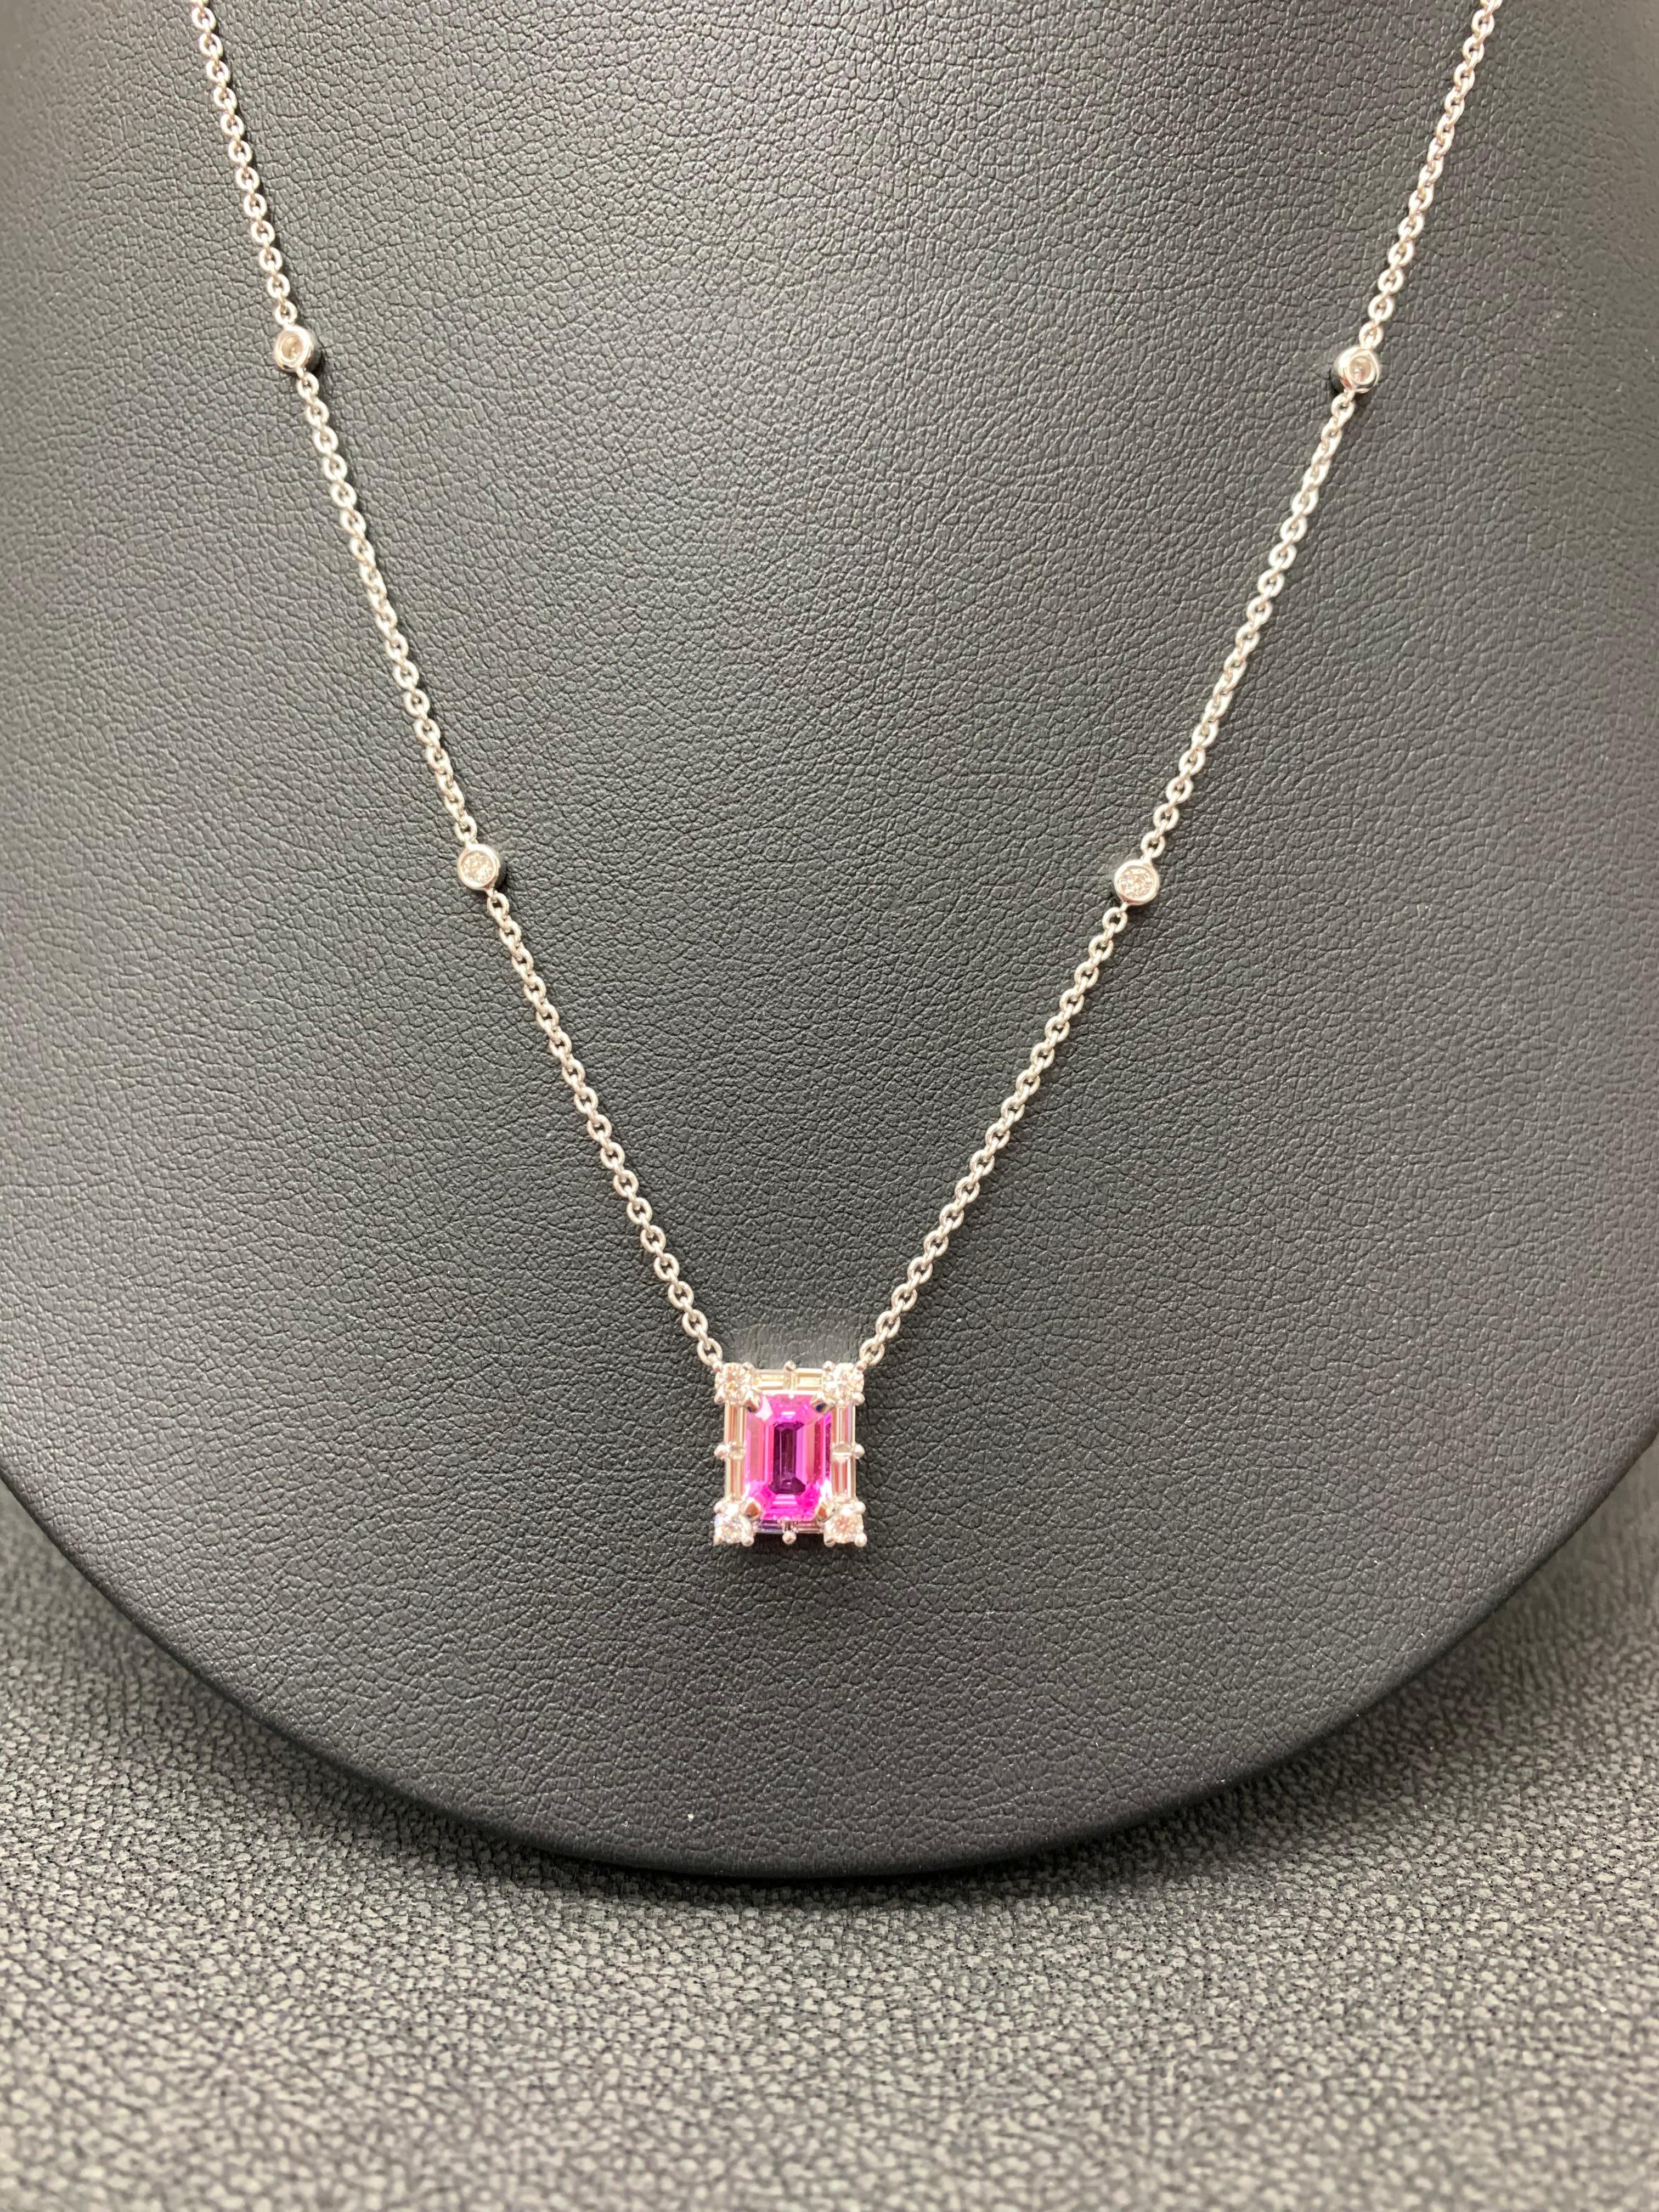 0.96 Carat Emerald Cut Pink Sapphire Diamond Pendant Necklace in 18K White Gold For Sale 3